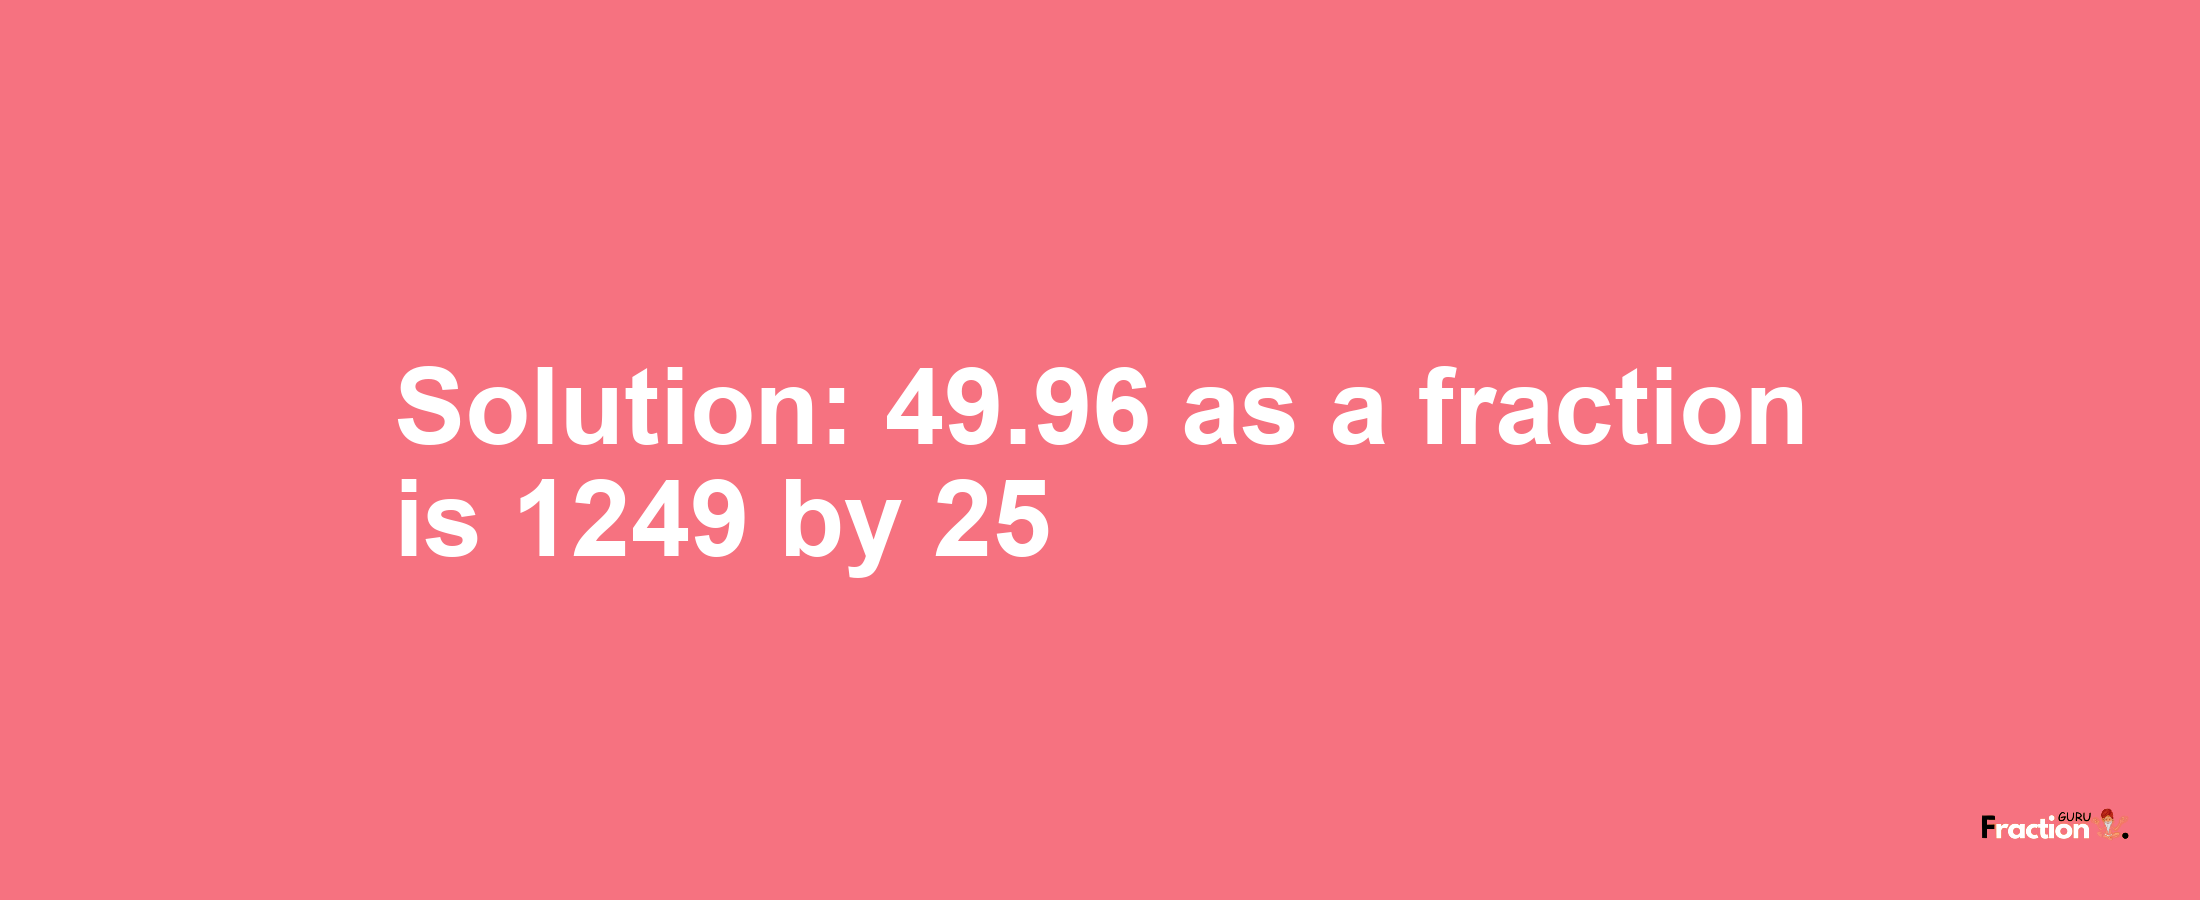 Solution:49.96 as a fraction is 1249/25